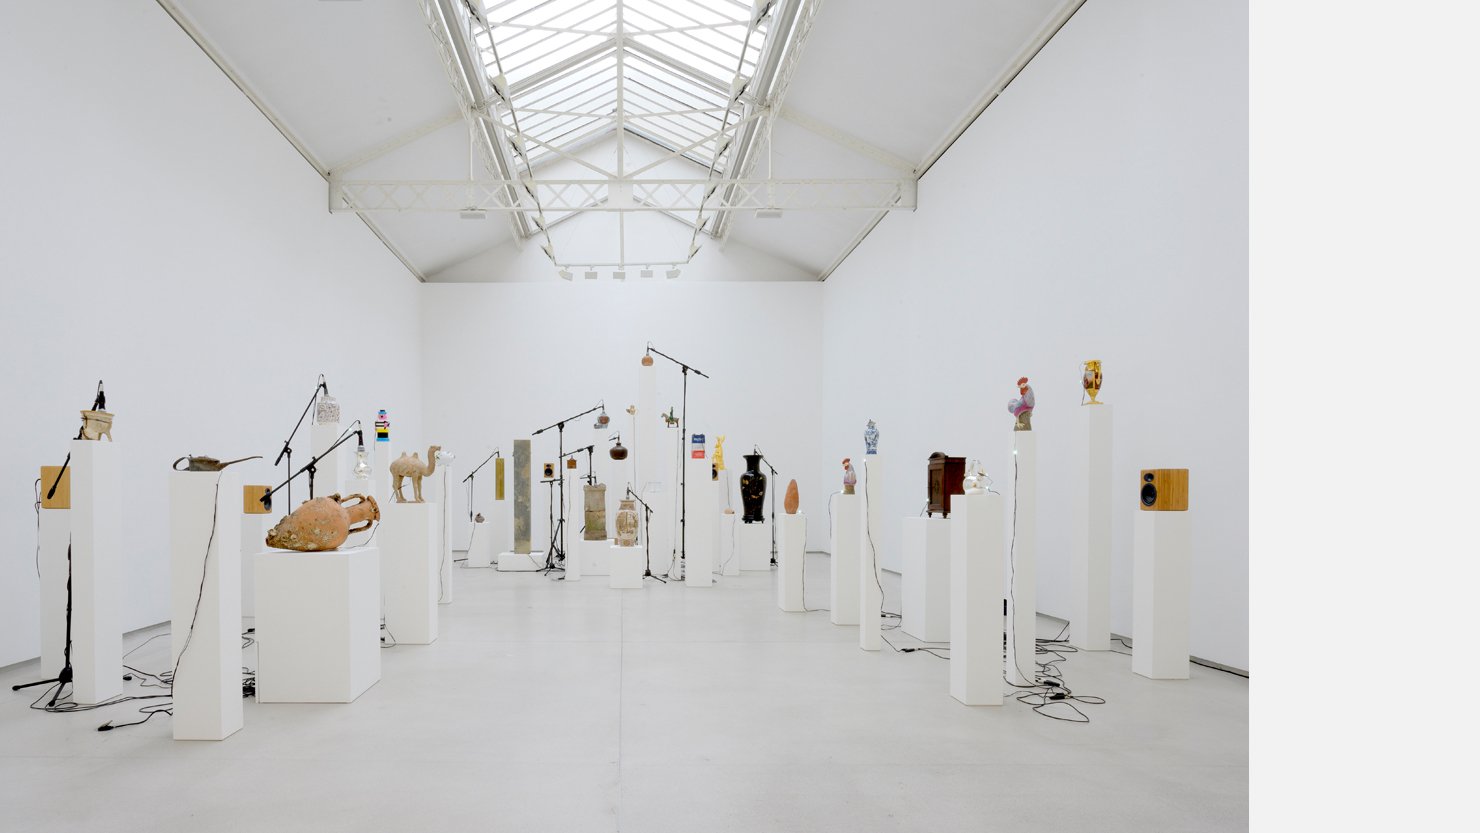 Oliver Beer - Household Gods, 2019 - Image courtesy the artist and Galerie Thaddaeus Ropac. Photo Charles Duprat